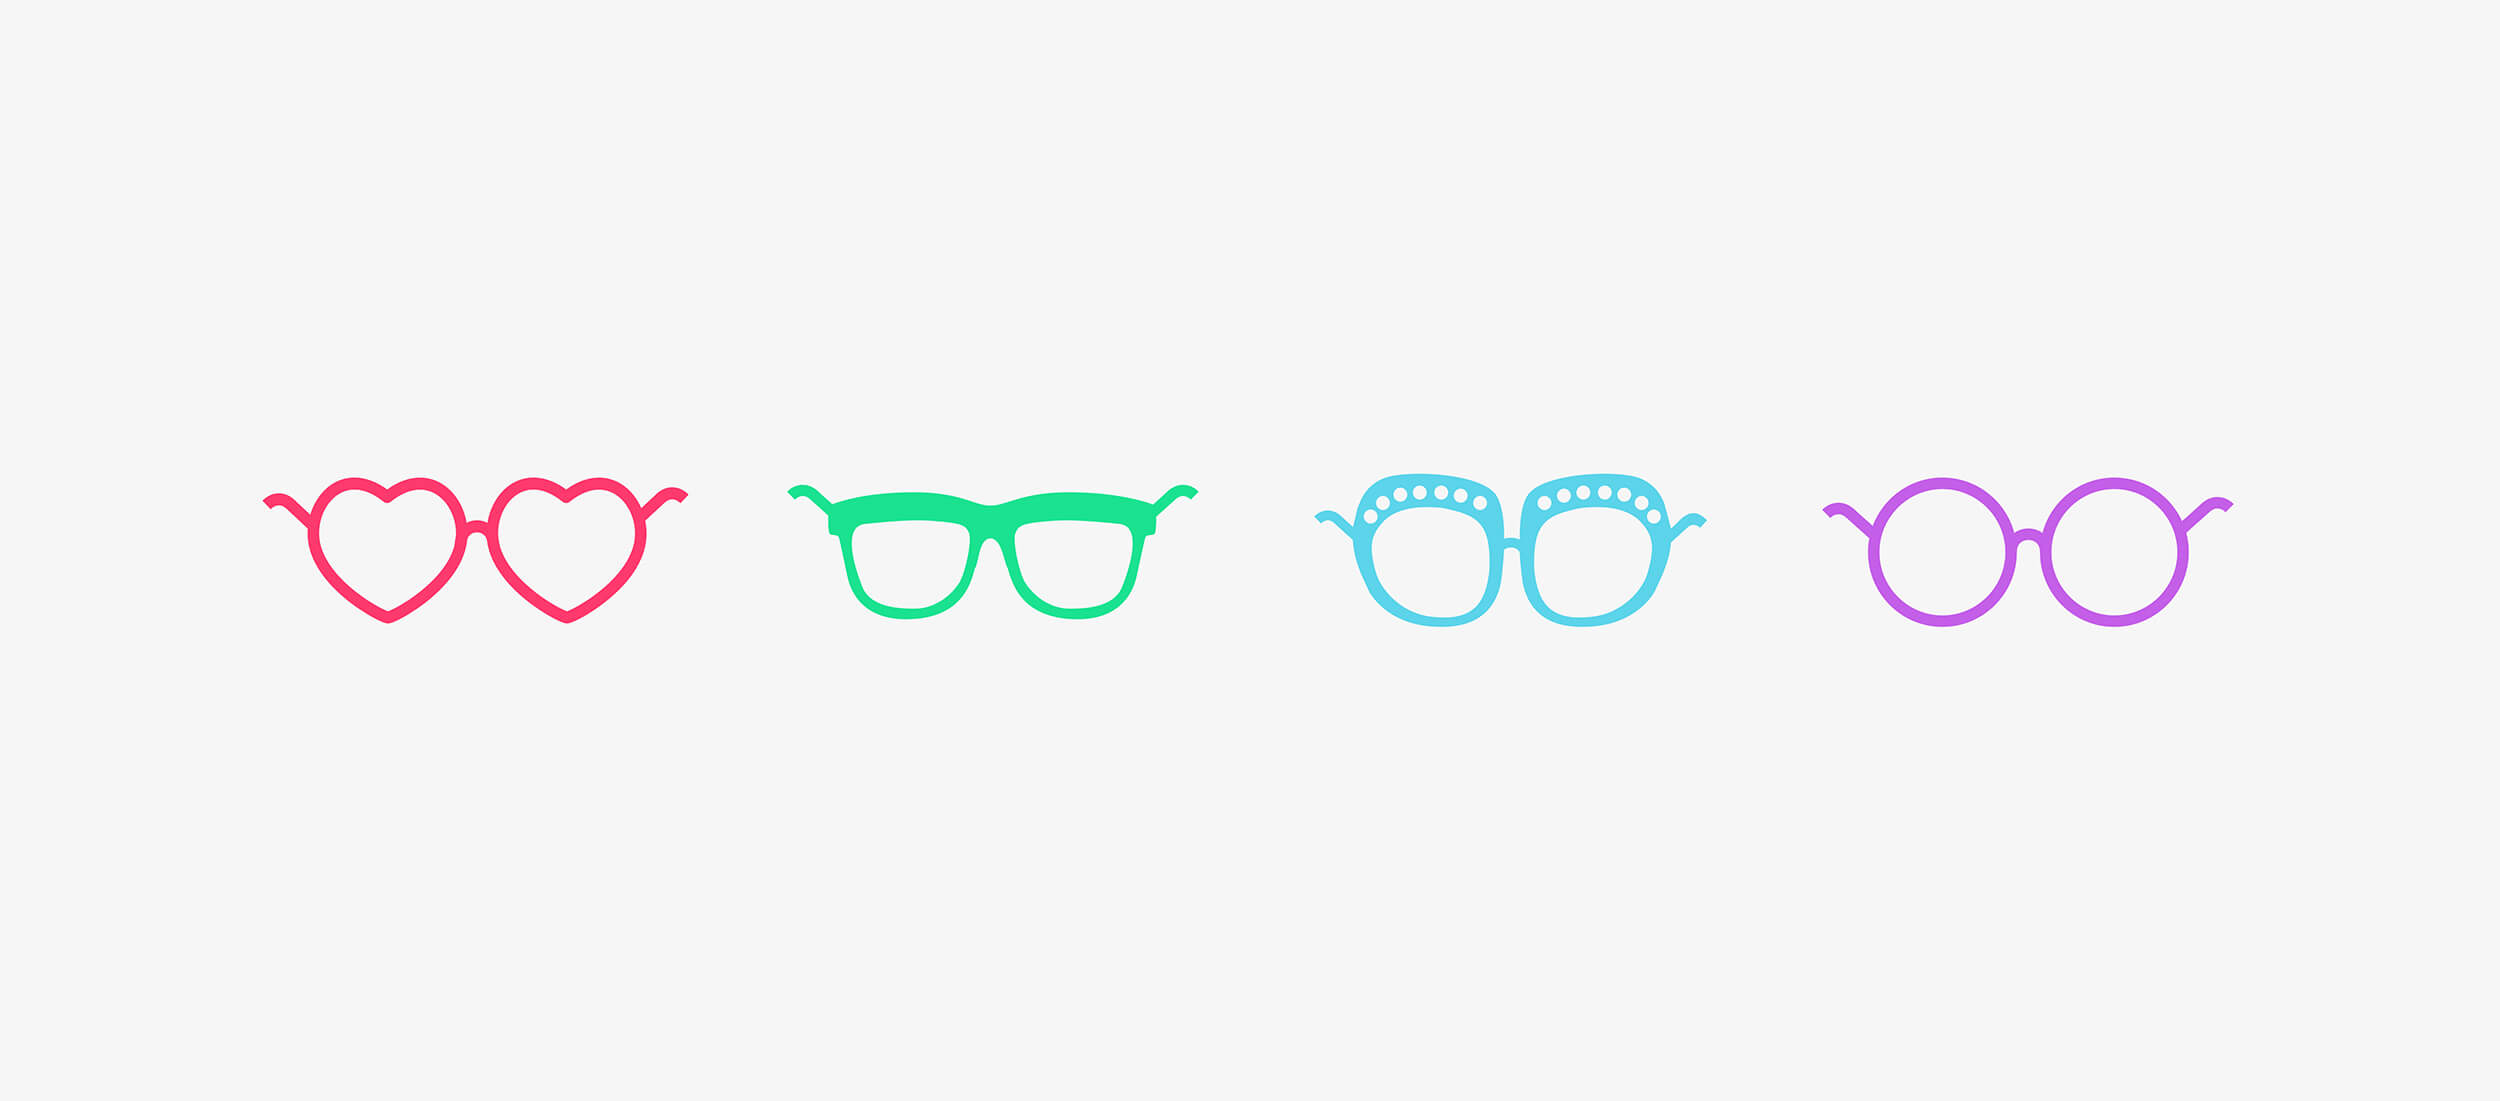 Iconic glasses icons featuring website link colors for Elton John site design